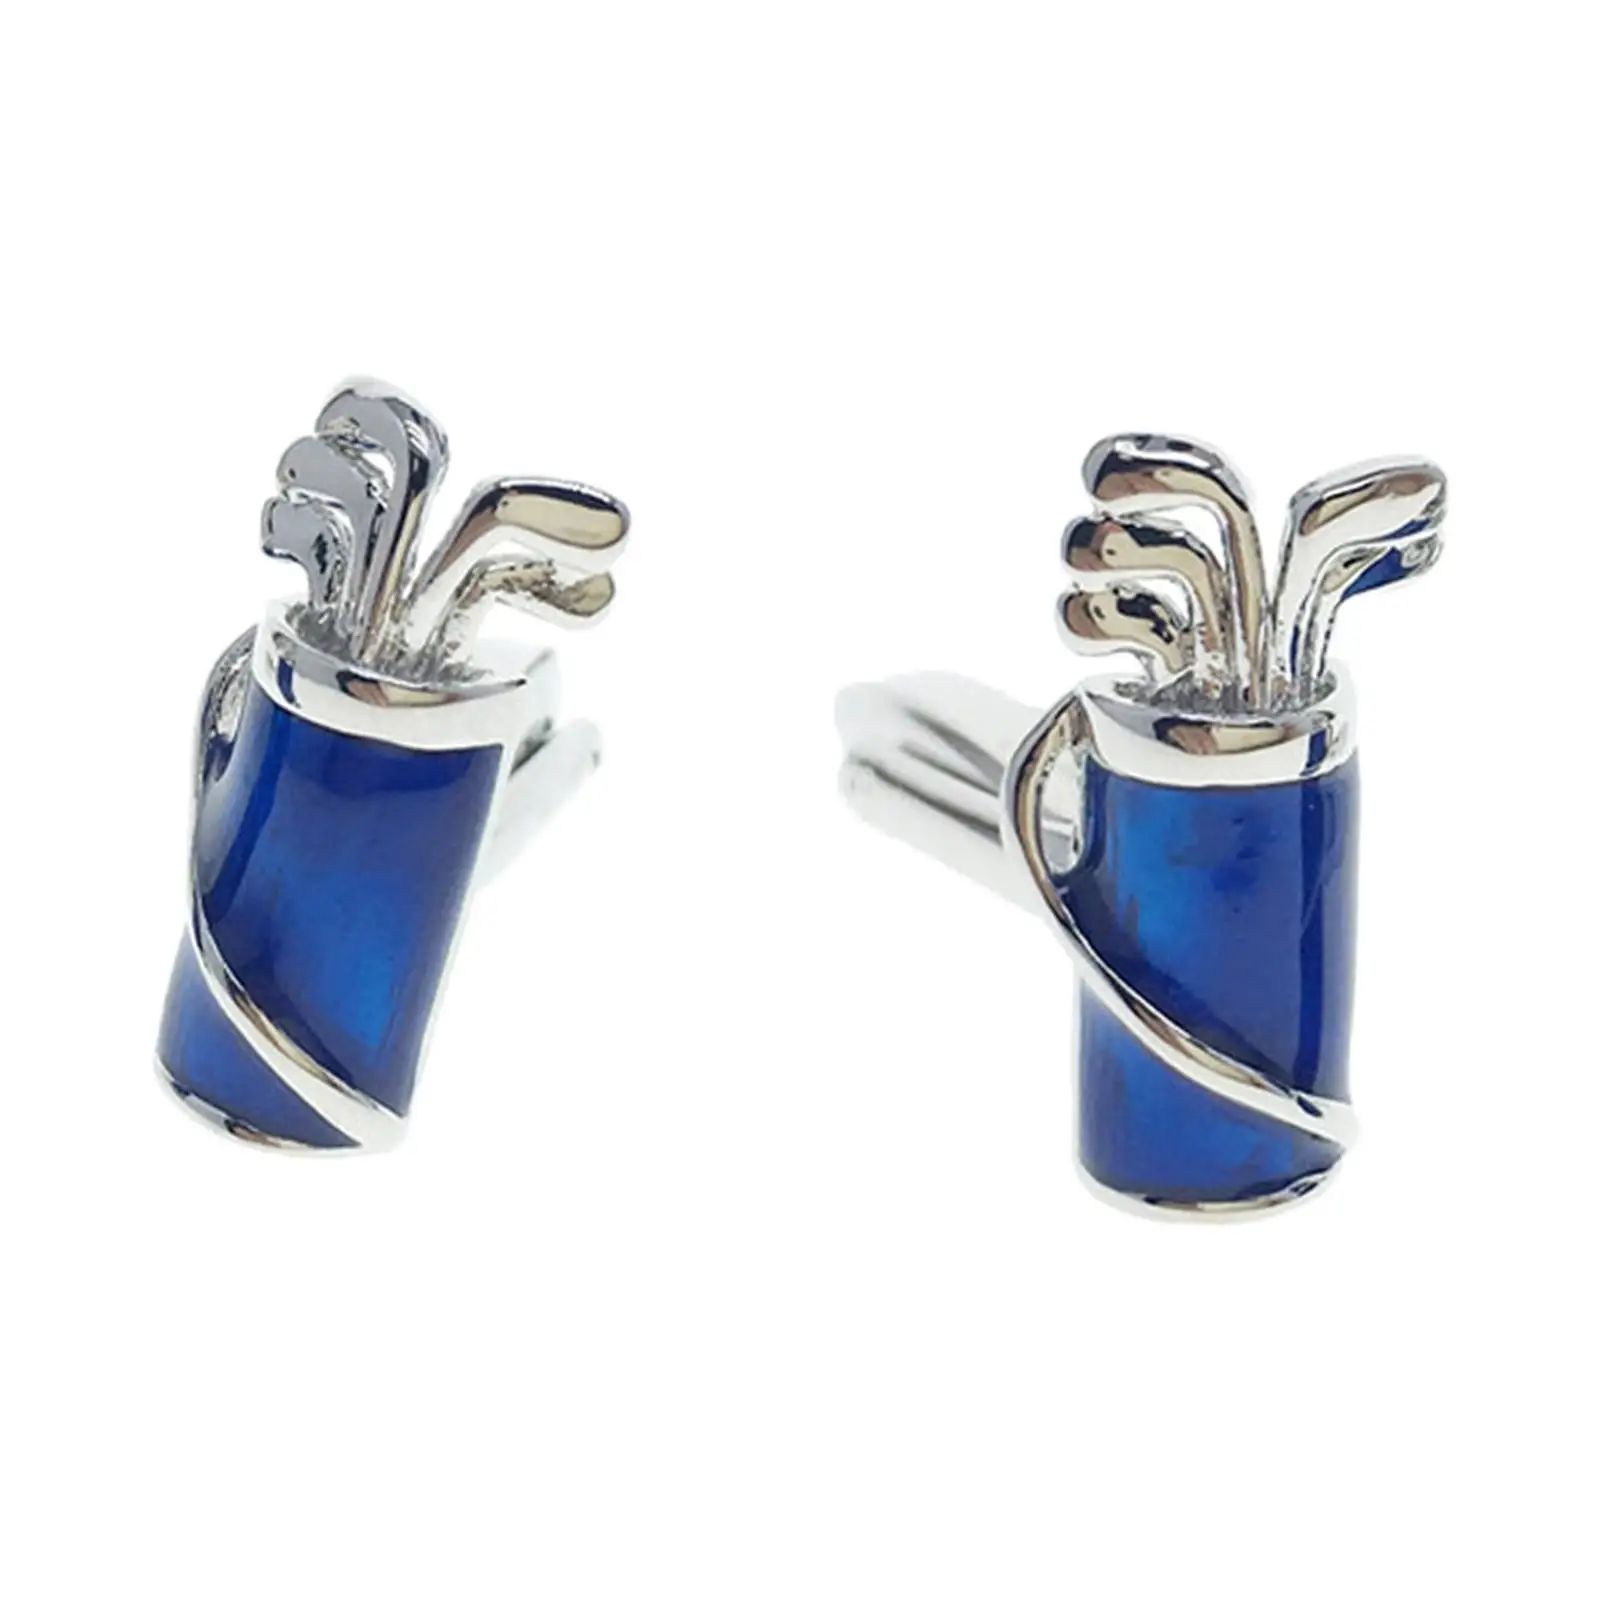 Cufflinks Classy Accessories Unique Jewelry Elegant ,Stylish Classic for Wedding Mens Business ,Groom ,Gift